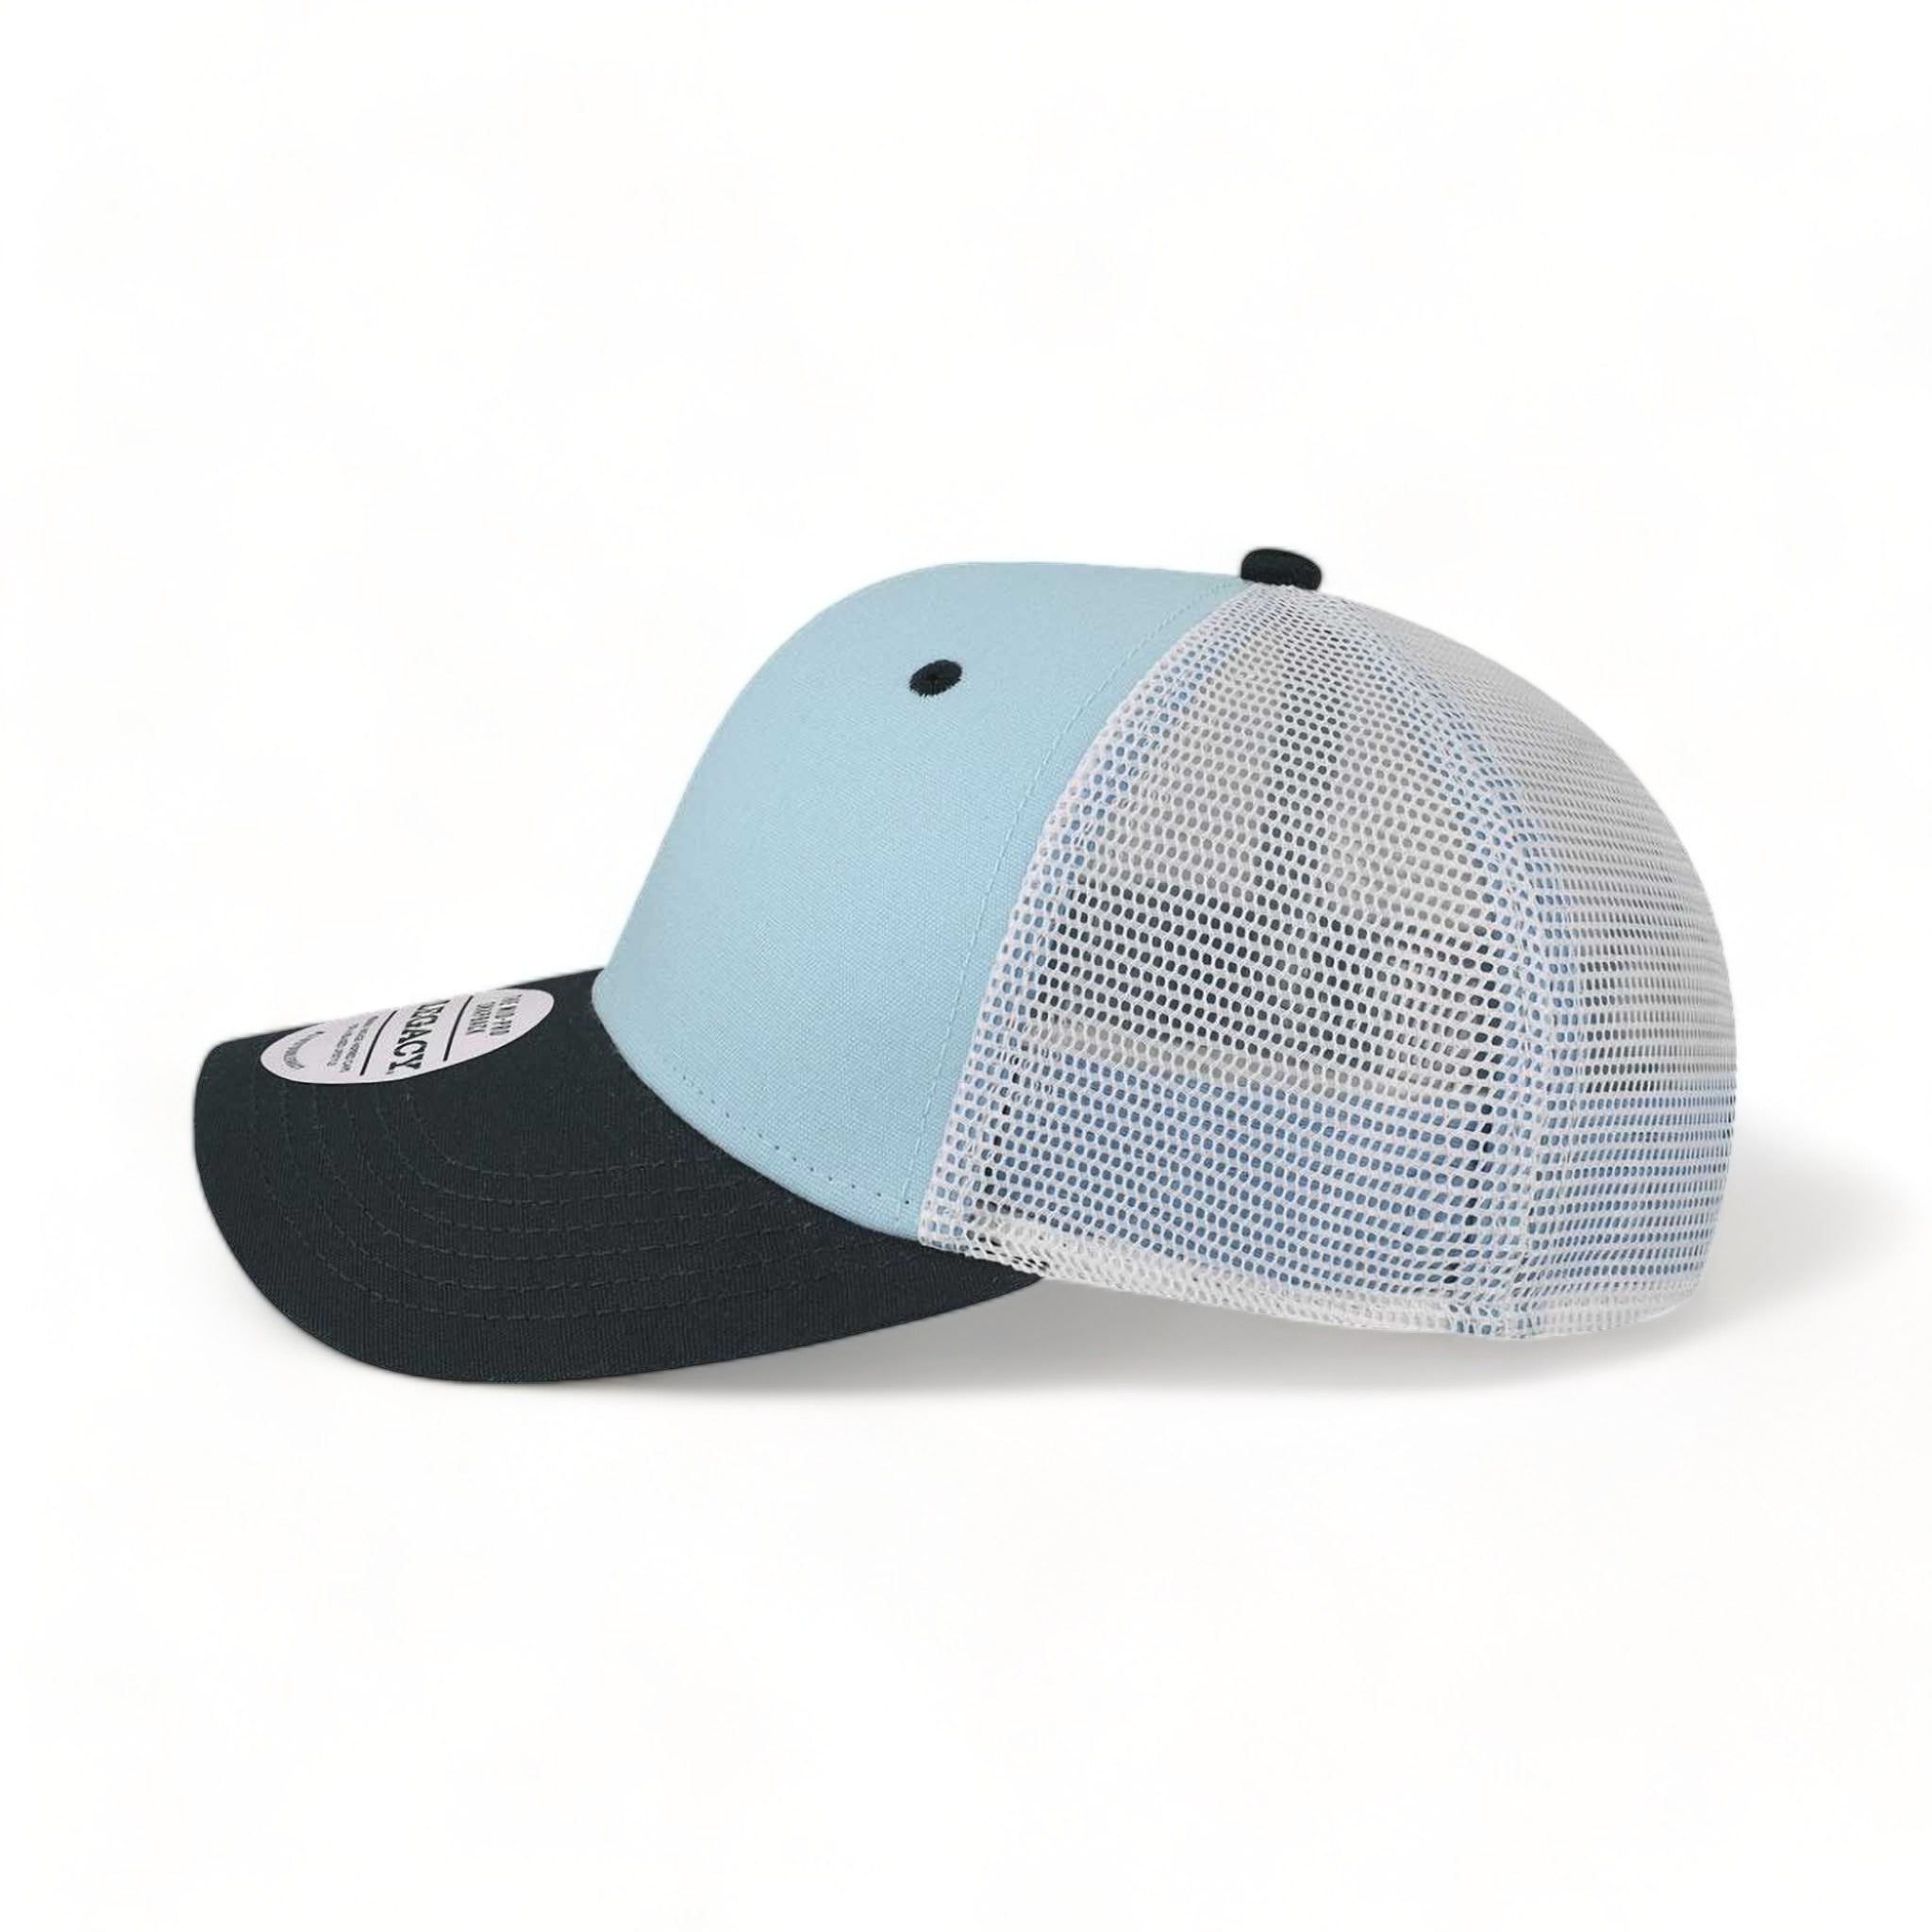 Side view of LEGACY MPS custom hat in light blue, navy and white